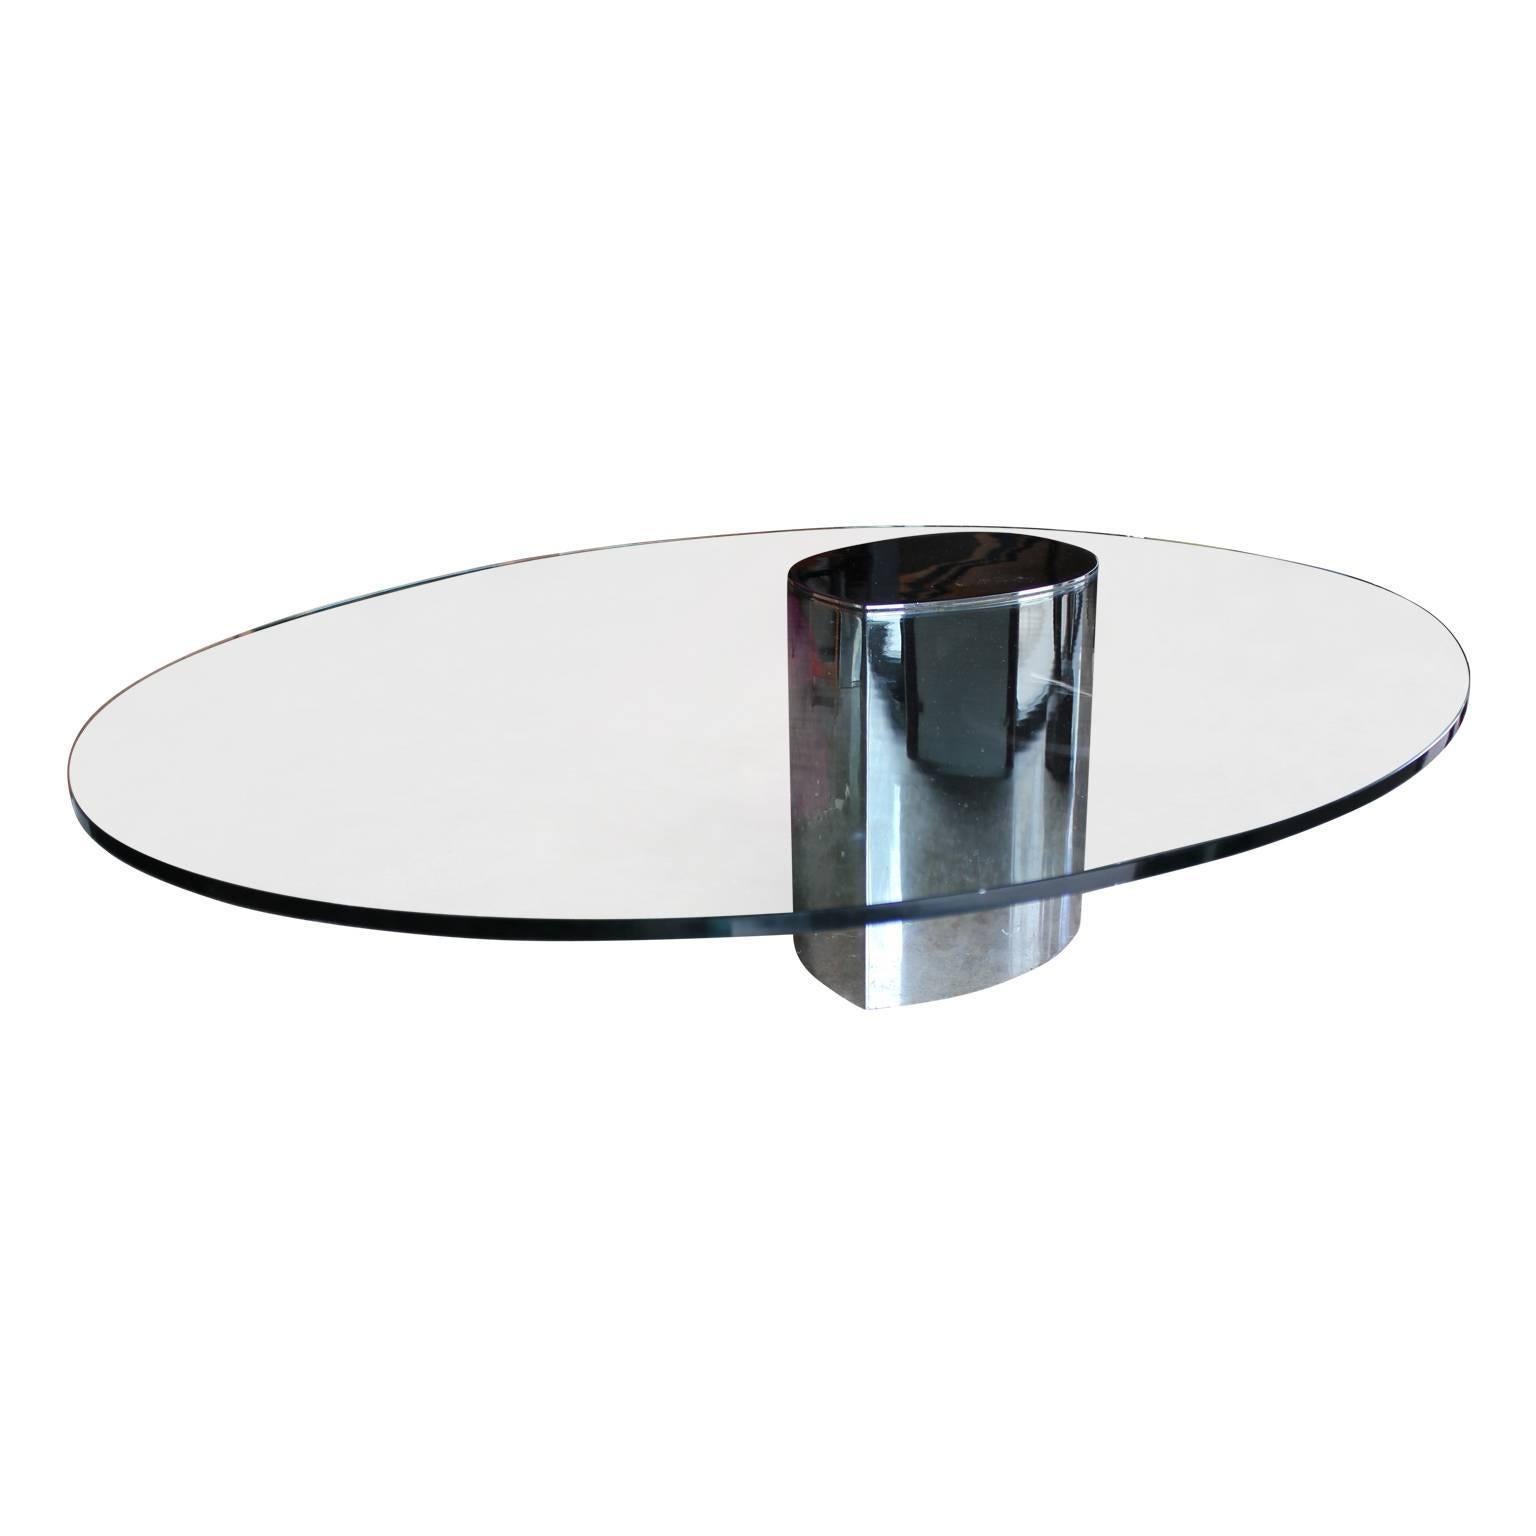 Classic Cini Boeri for Knoll chrome and glass Lunario coffee table. Perfect for the modern or mi-mod home!